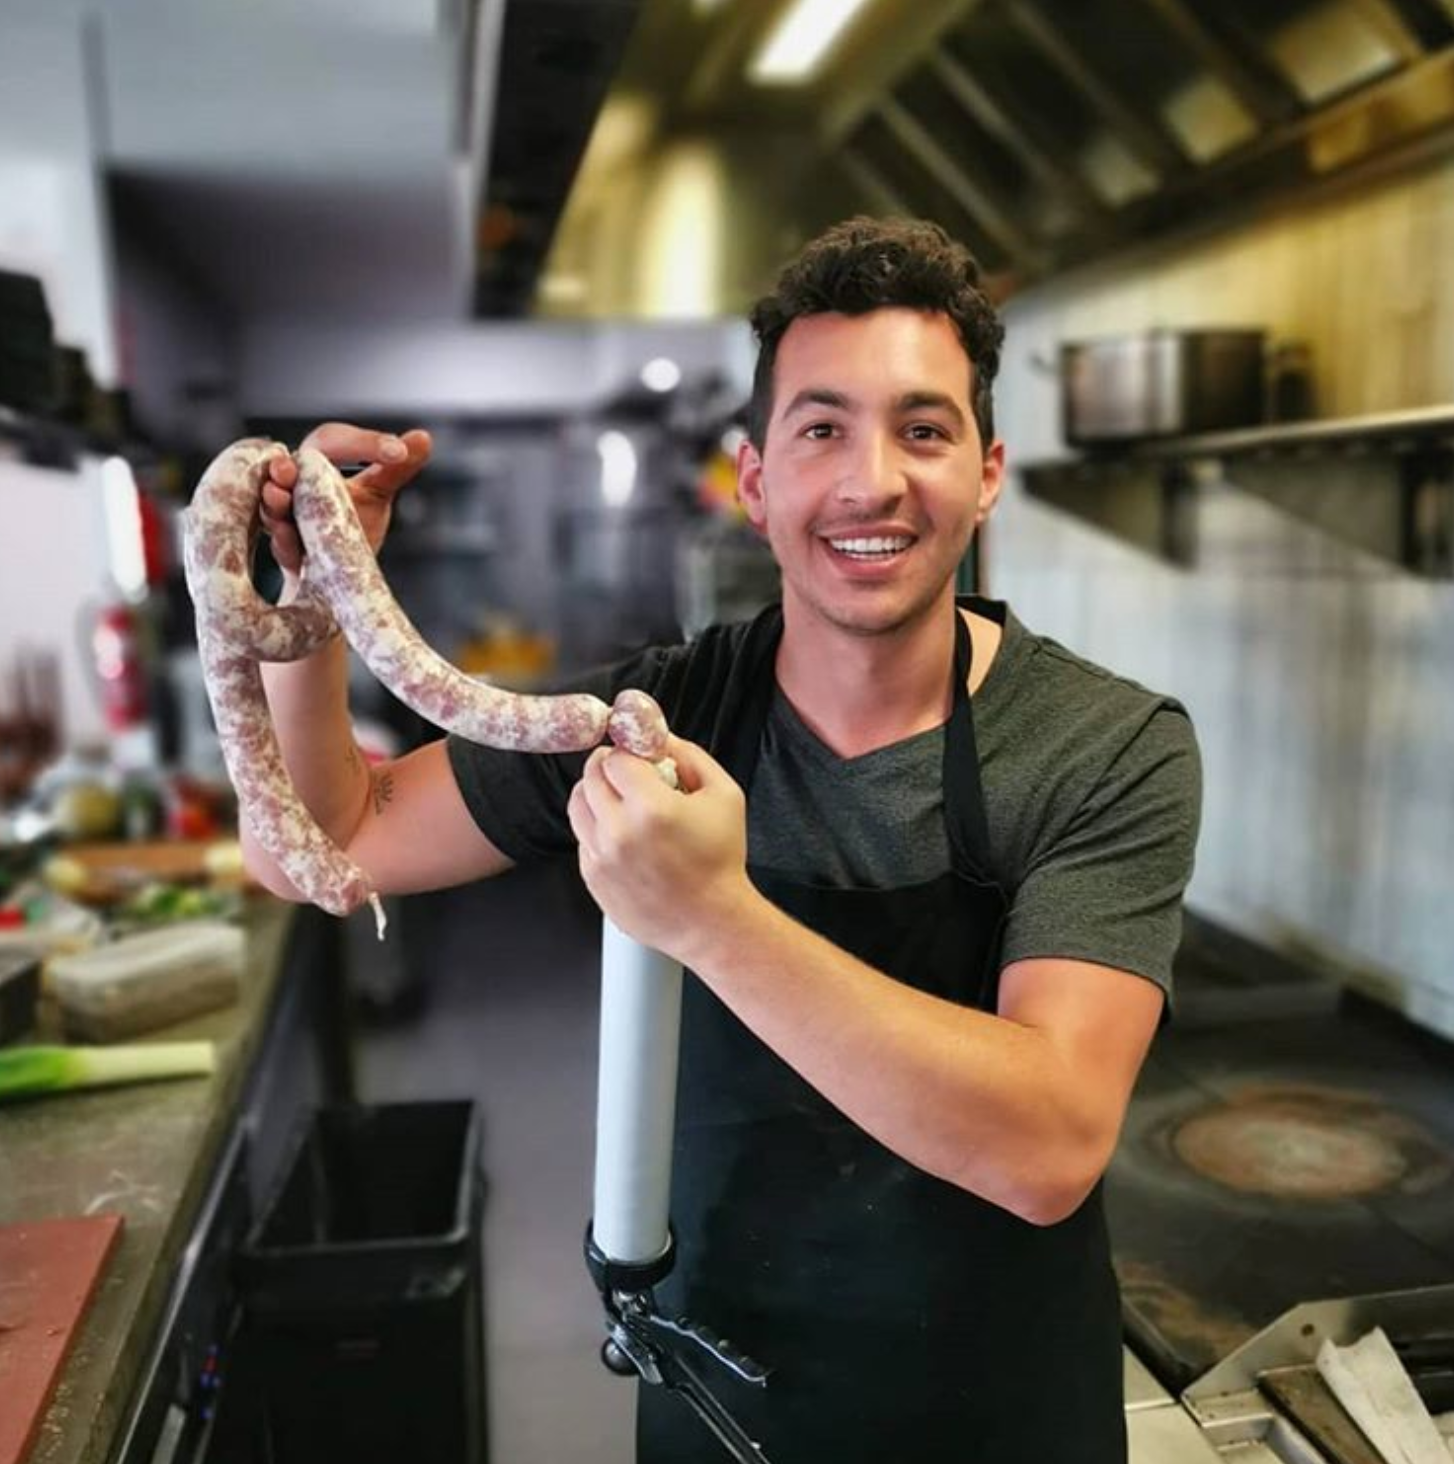 Gabriel of Ziggy's Wildfoods holding portion of cured sausage